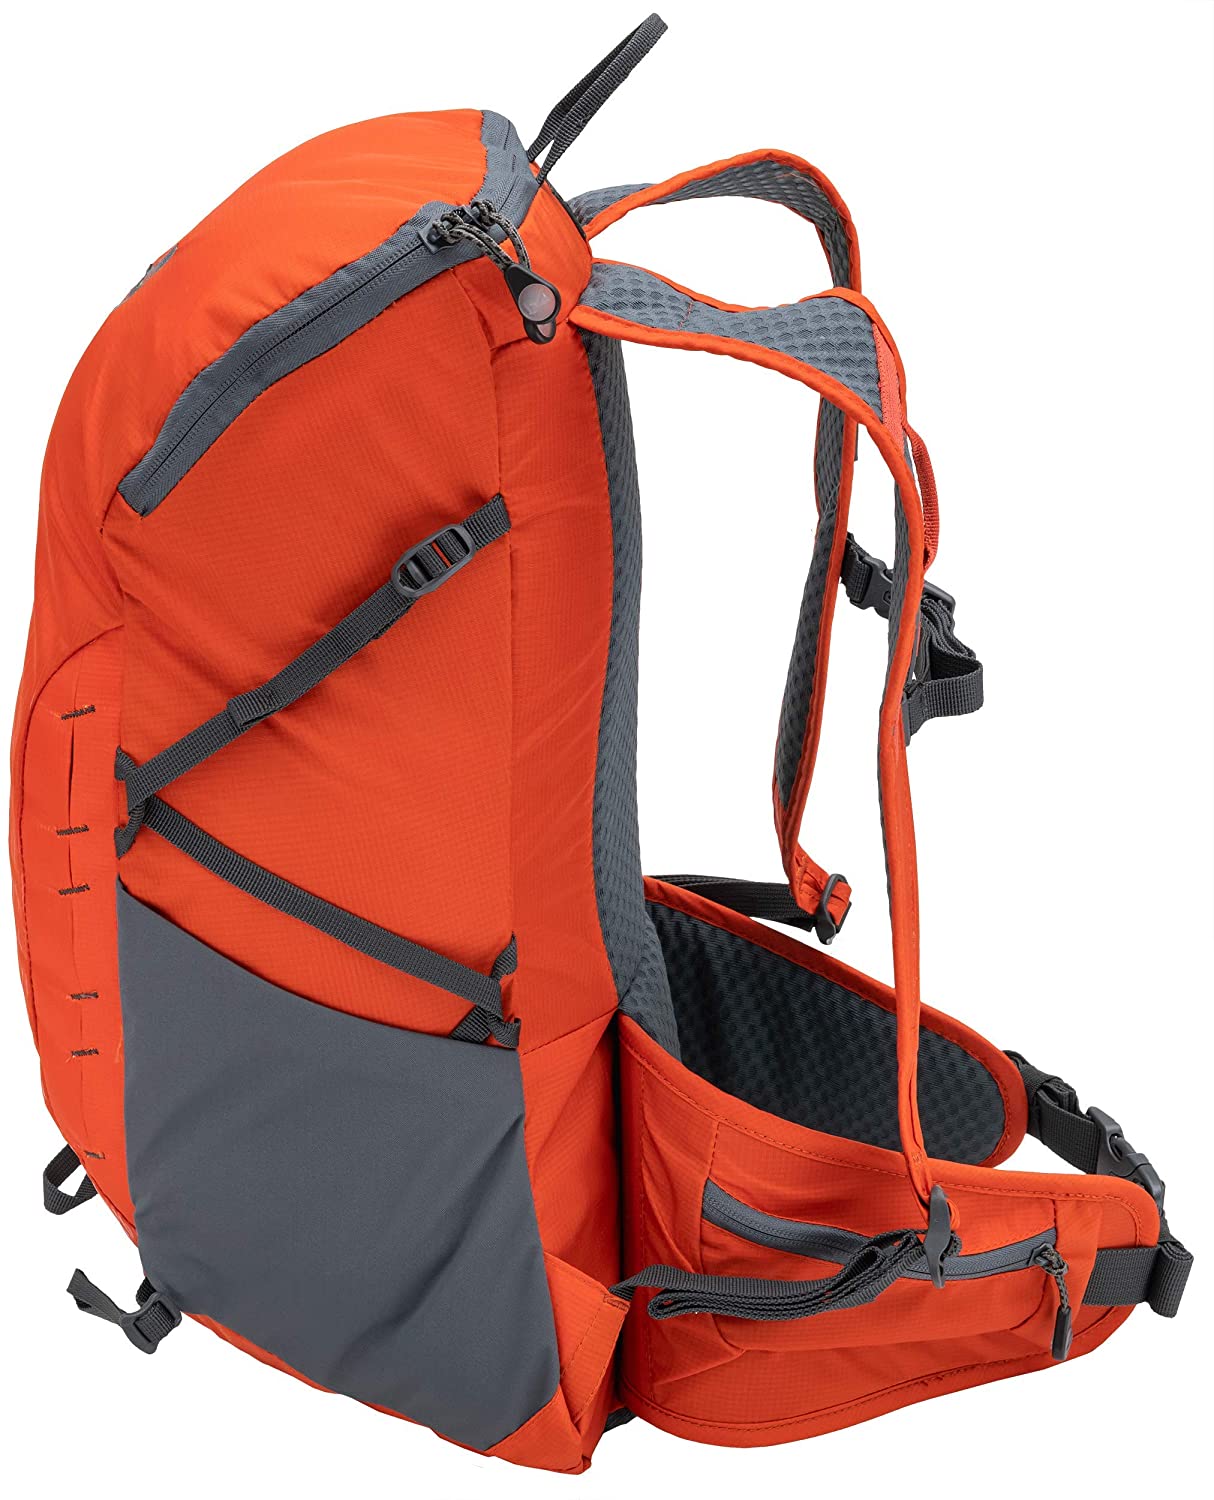 ALPS Mountaineering Canyon Day Backpack 20L, Chili/Gray - AL6053052